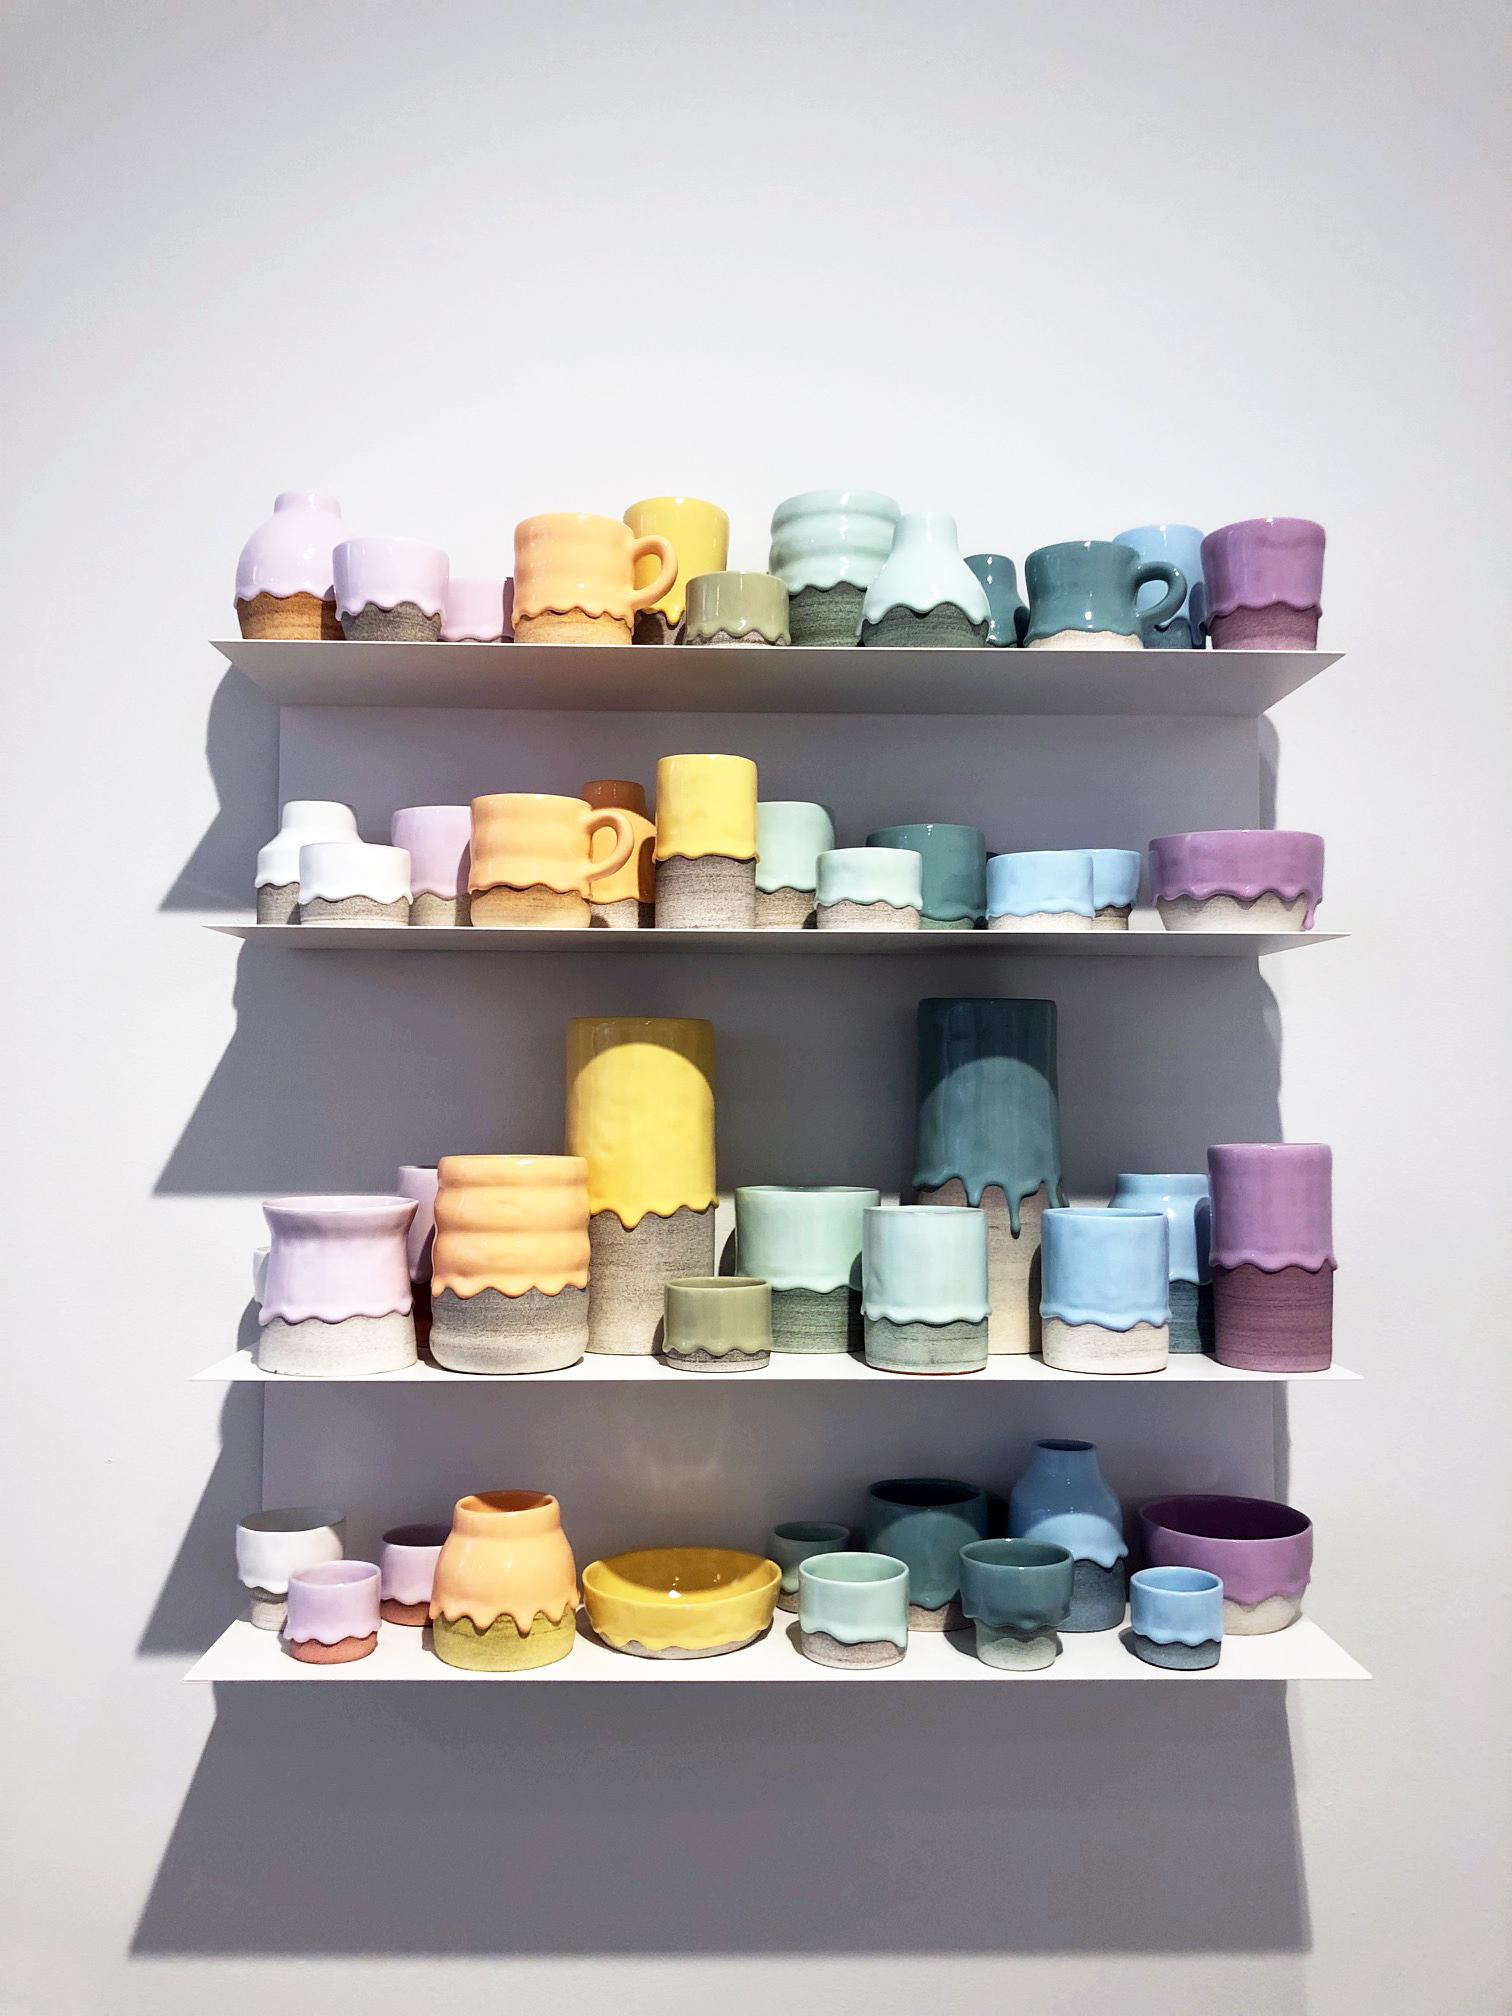 Ceramic Vessel Wall Installation with Shelving, 48 Individual Pieces, Colorful - Art by Brian Giniewski